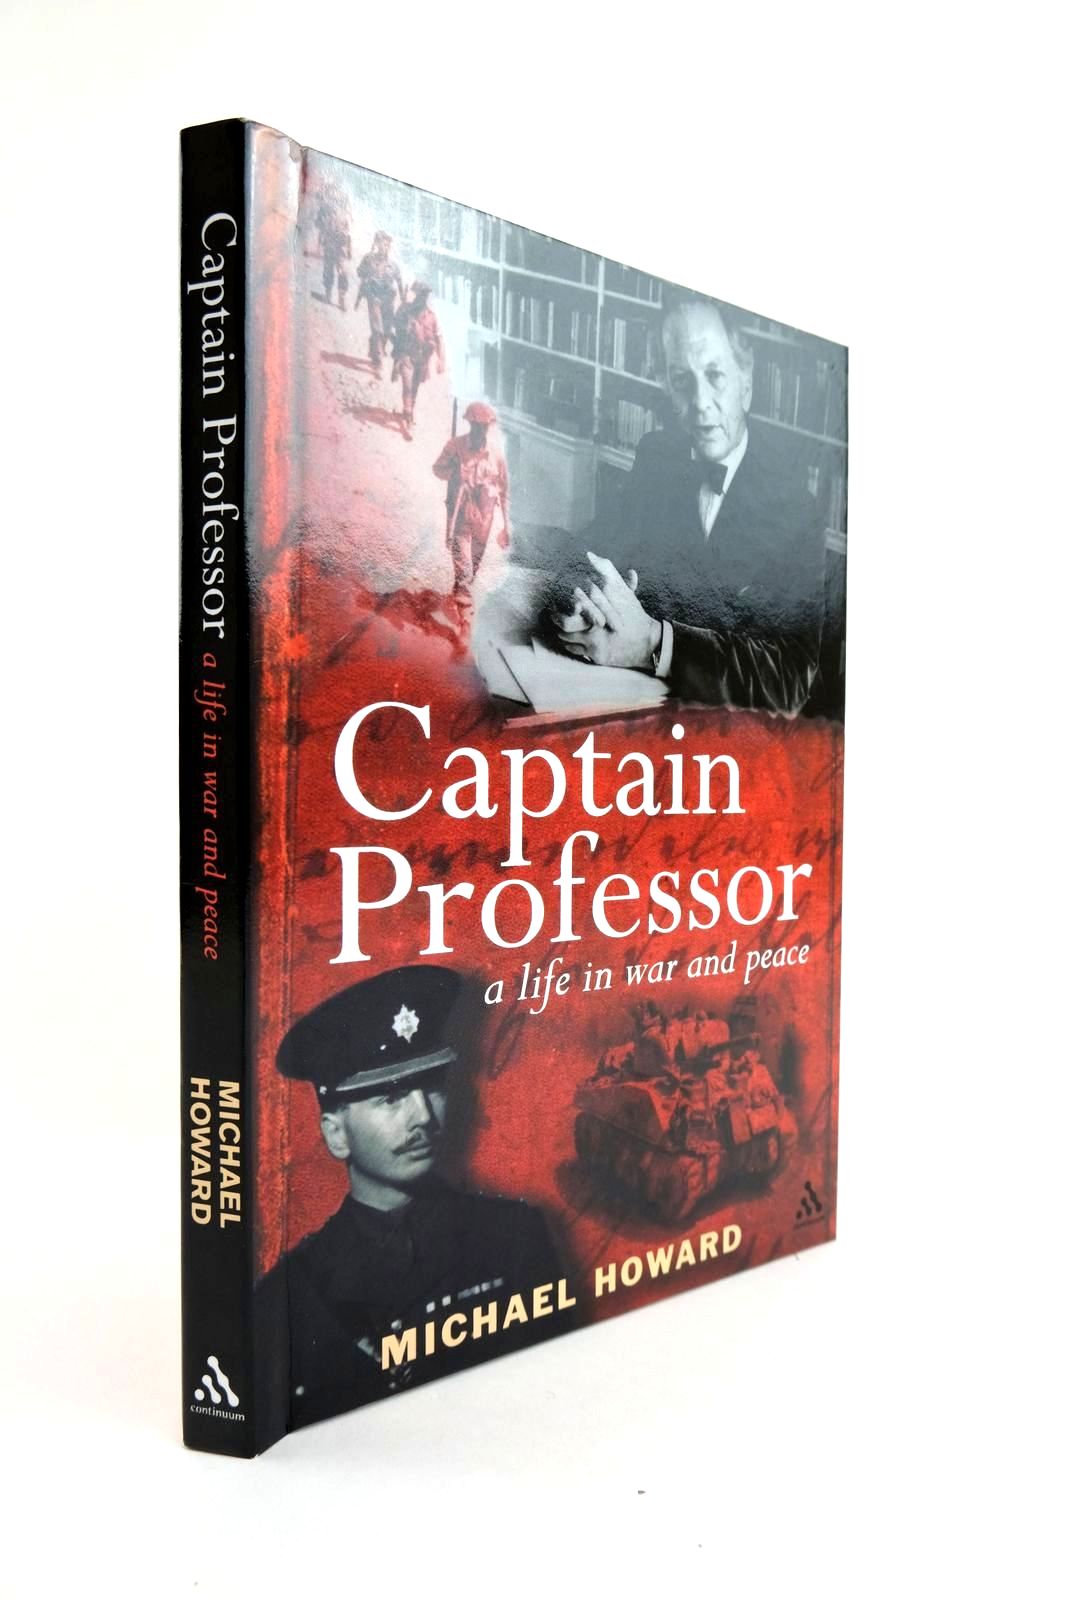 Photo of CAPTAIN PROFESSOR A LIFE IN WAR AND PEACE written by Howard, Michael published by Continuum (STOCK CODE: 2133423)  for sale by Stella & Rose's Books